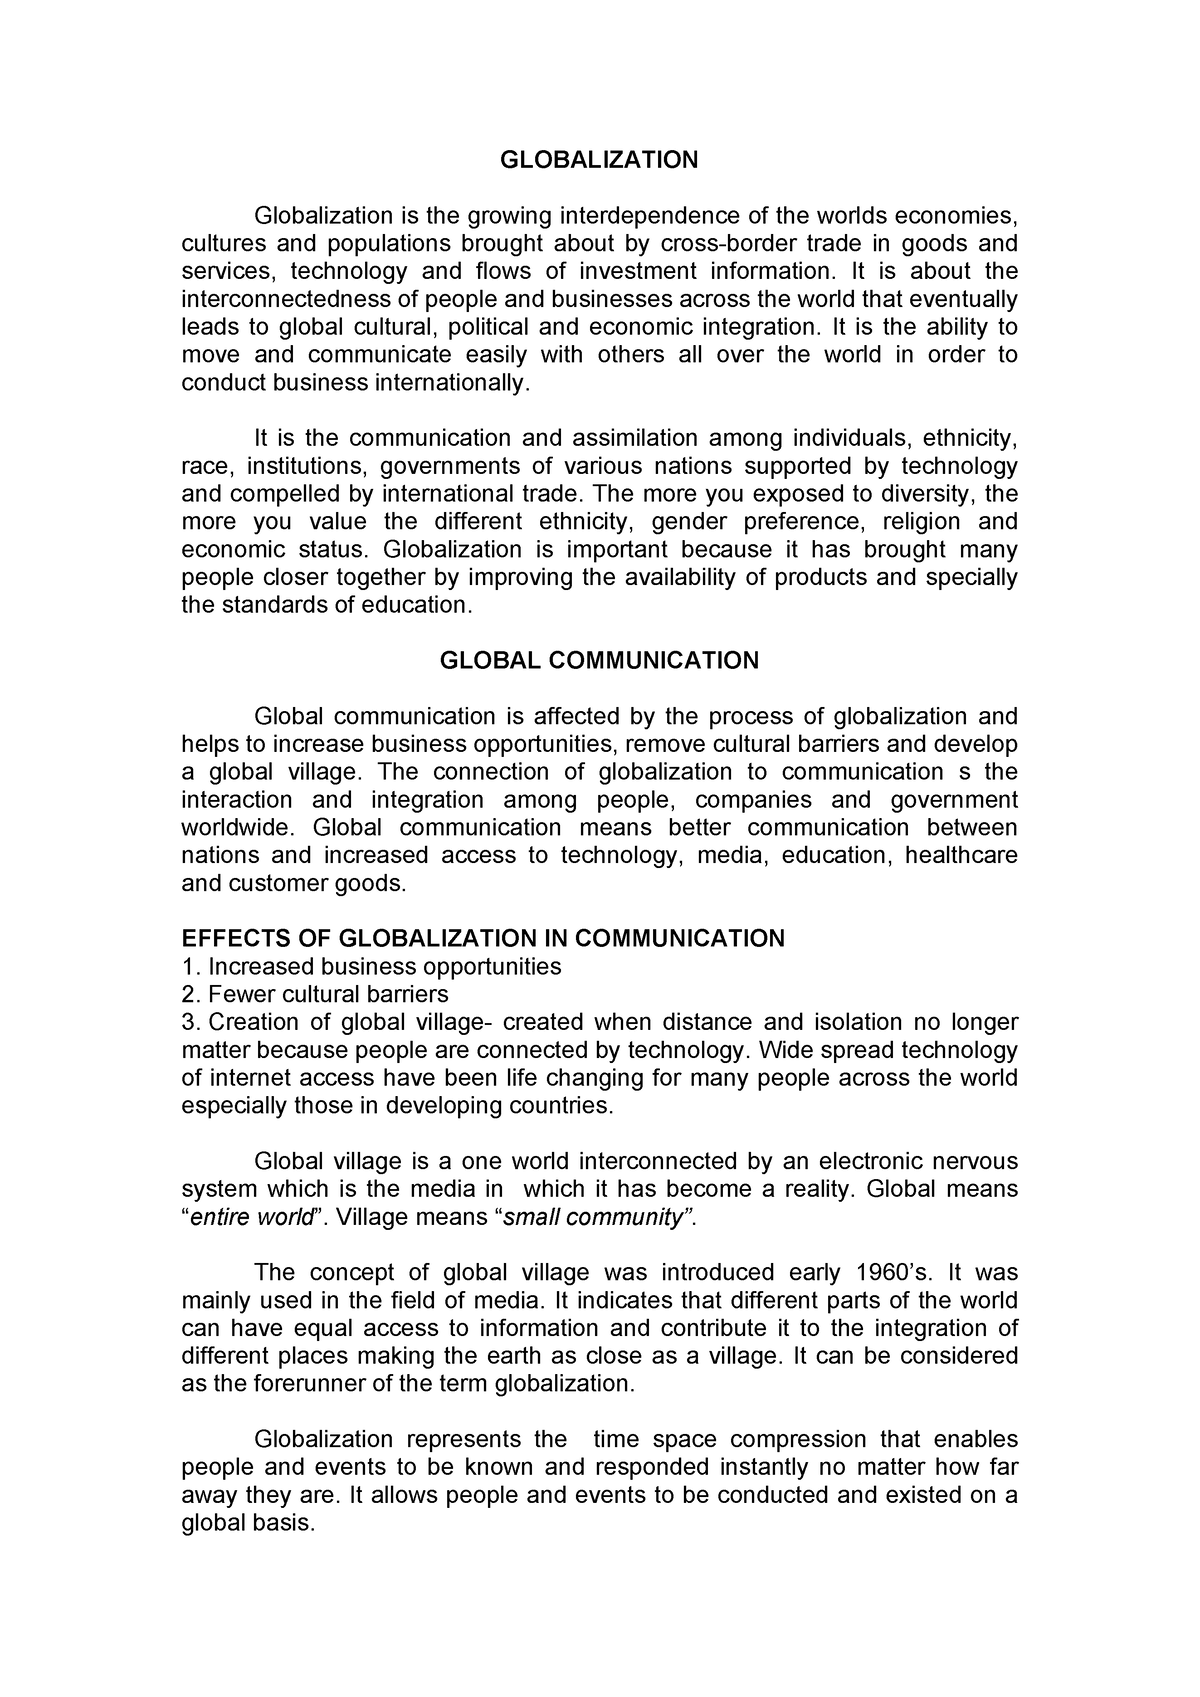 what is the role of communication in globalization essay